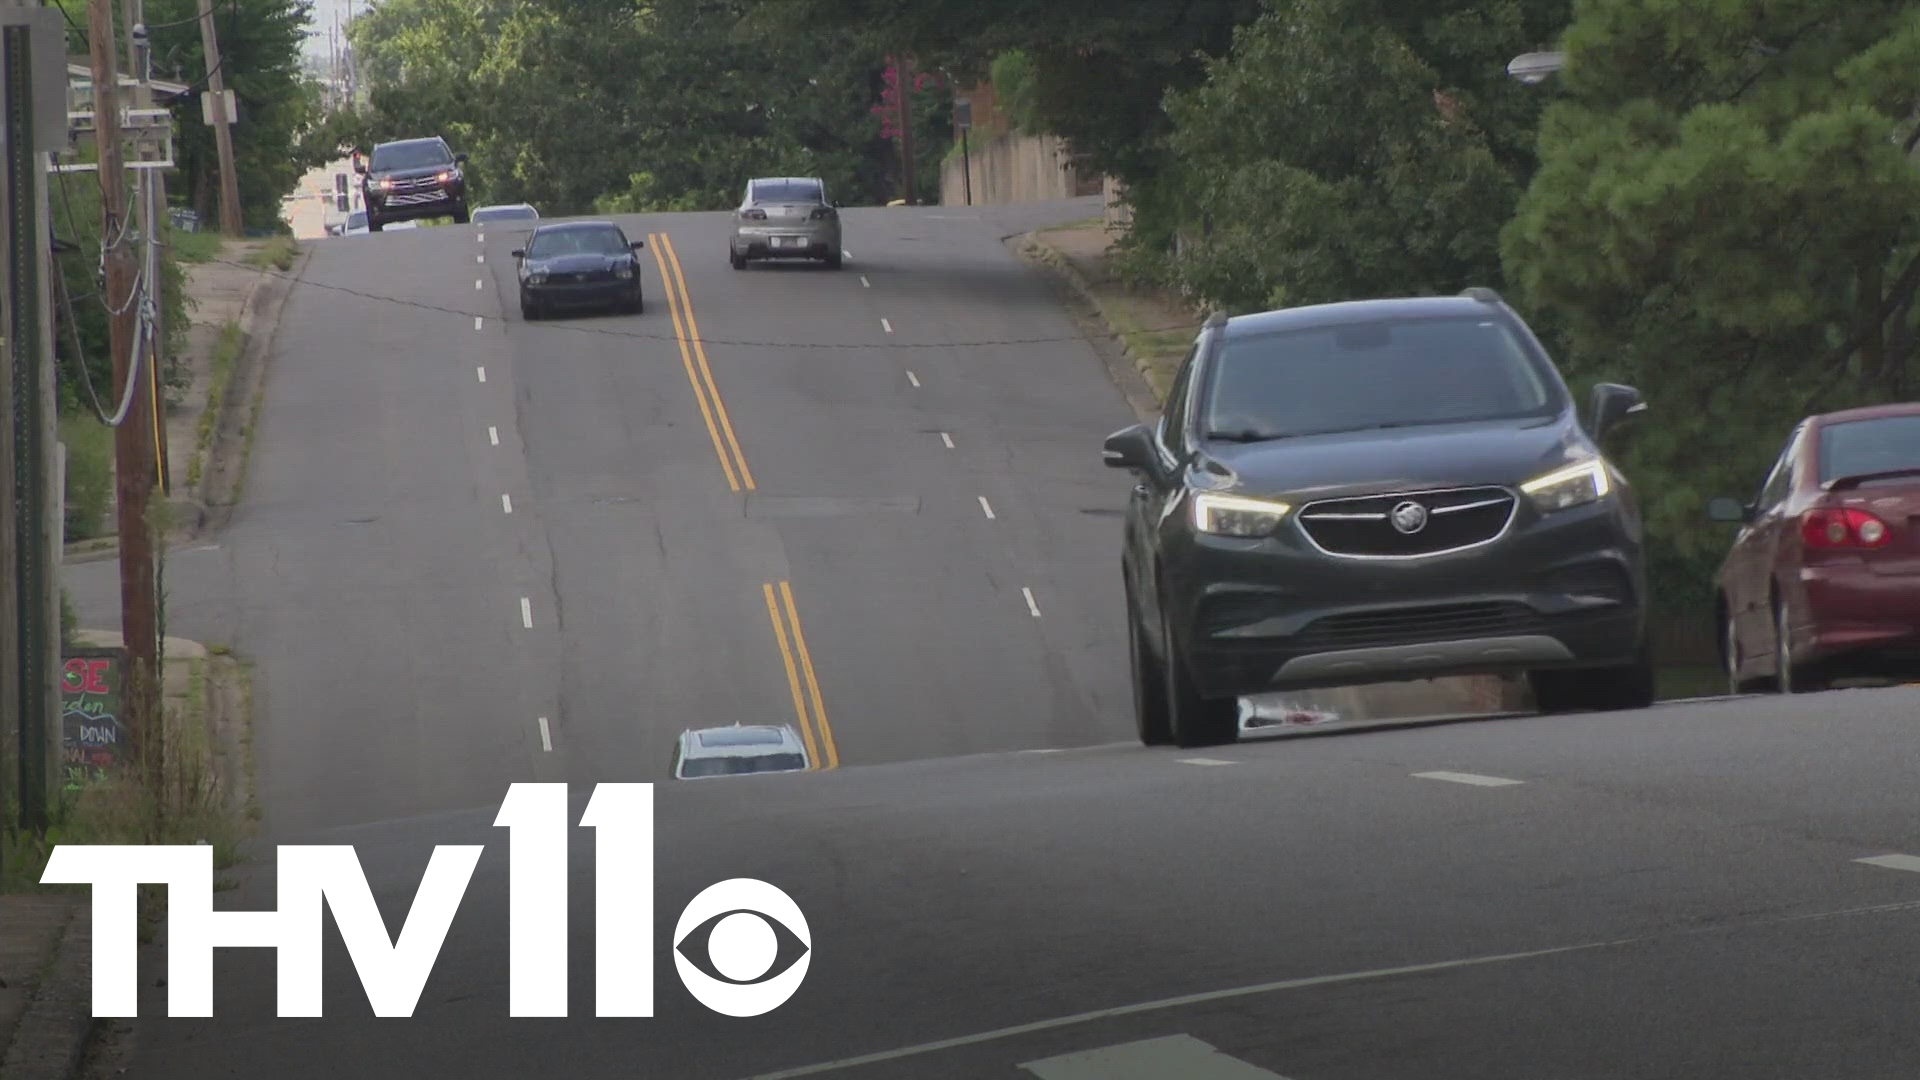 Little Rock drivers will soon see some changes to West Markham Street as the city begins a two-phase project to increase safety.